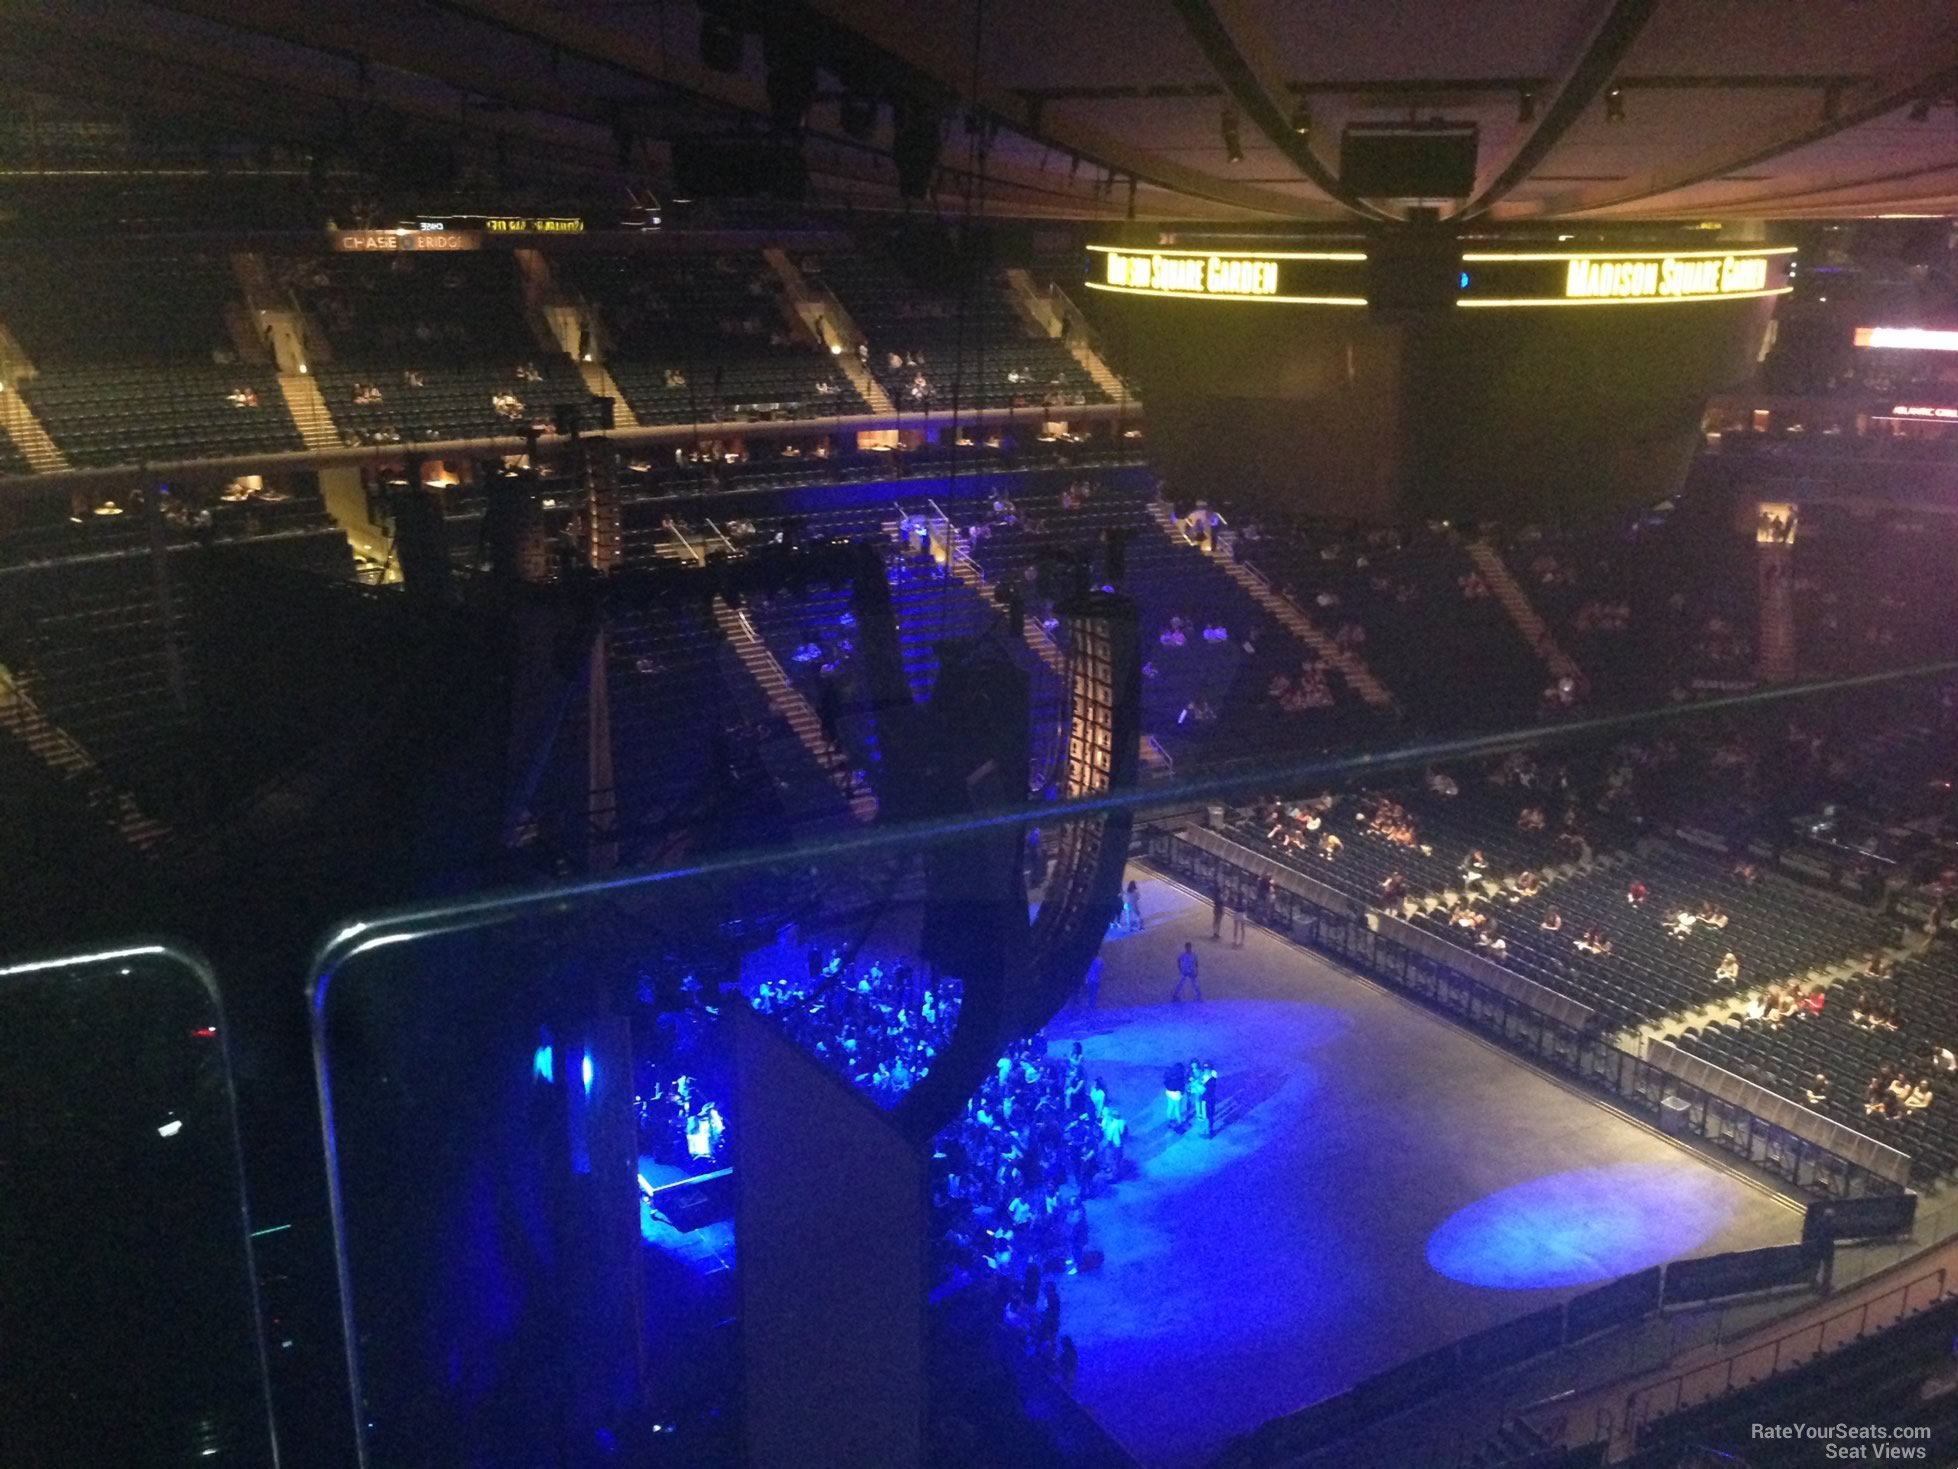 section 324 seat view  for concert - madison square garden